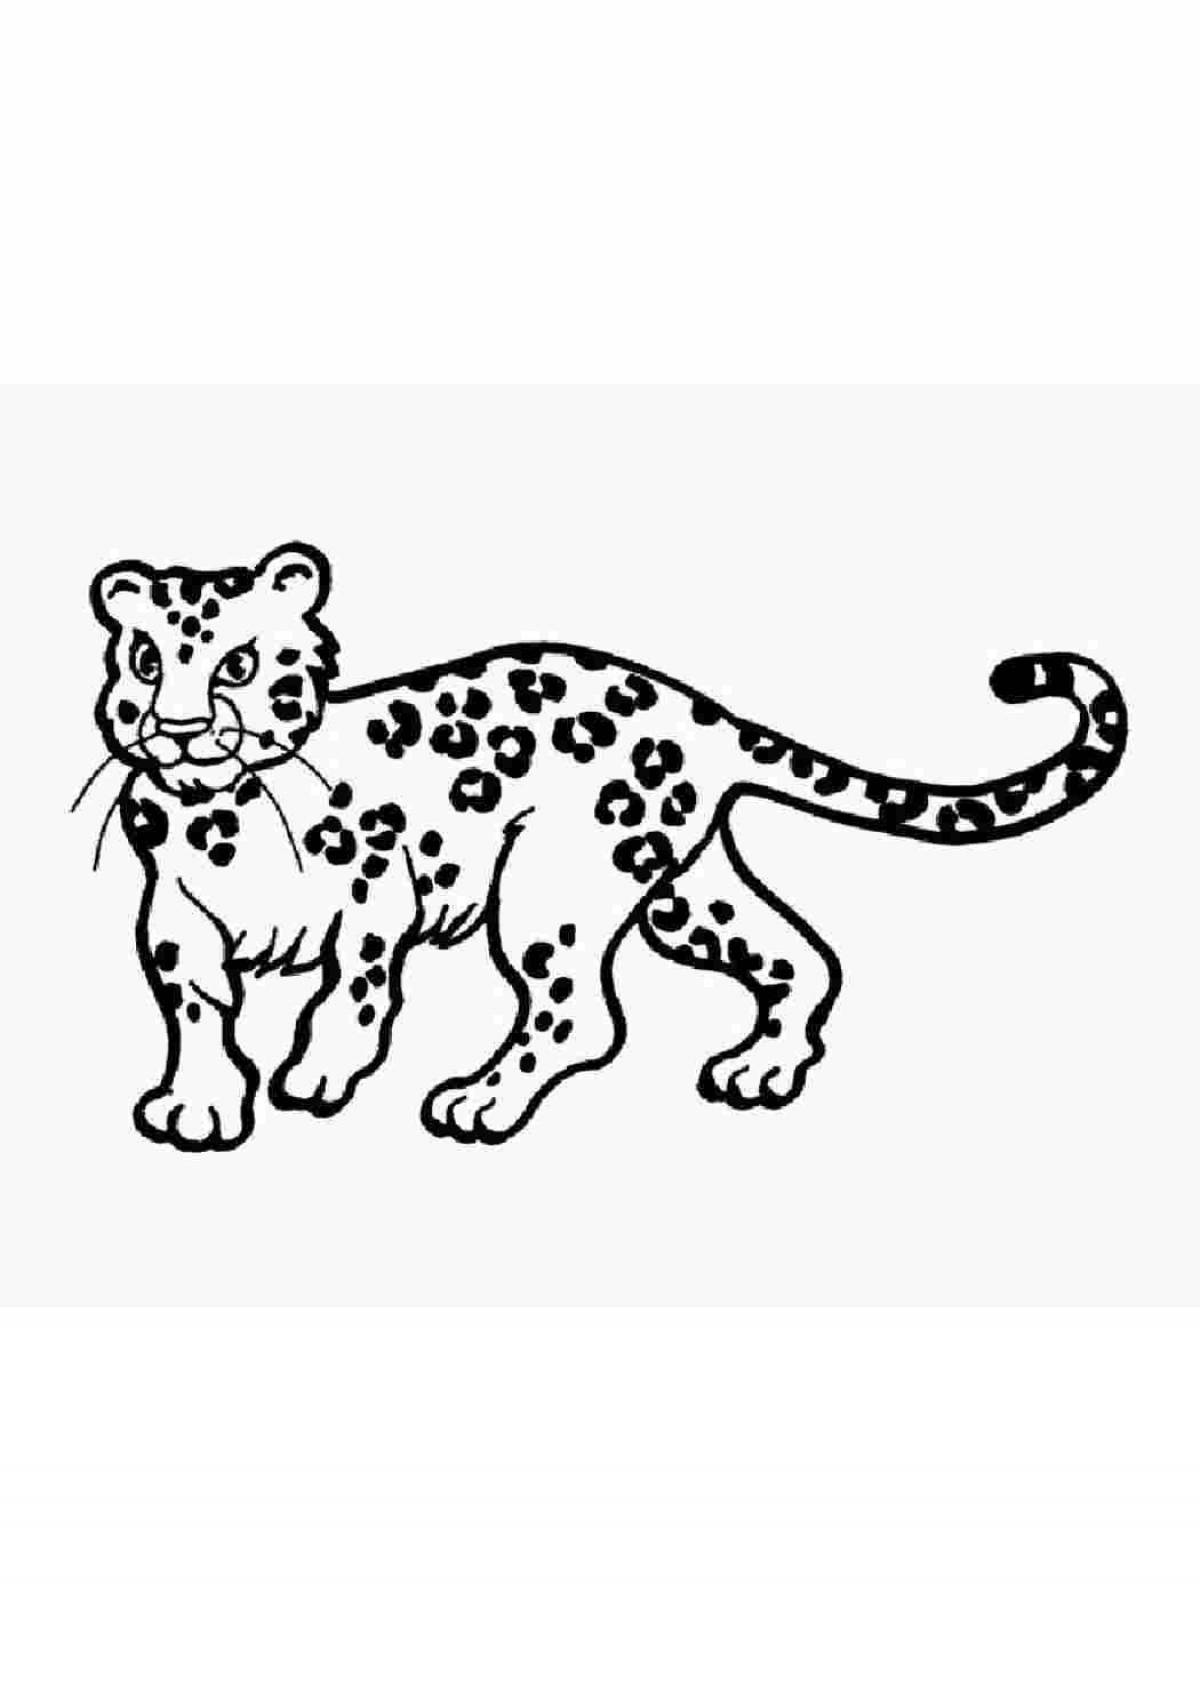 Awesome clouded leopard coloring page